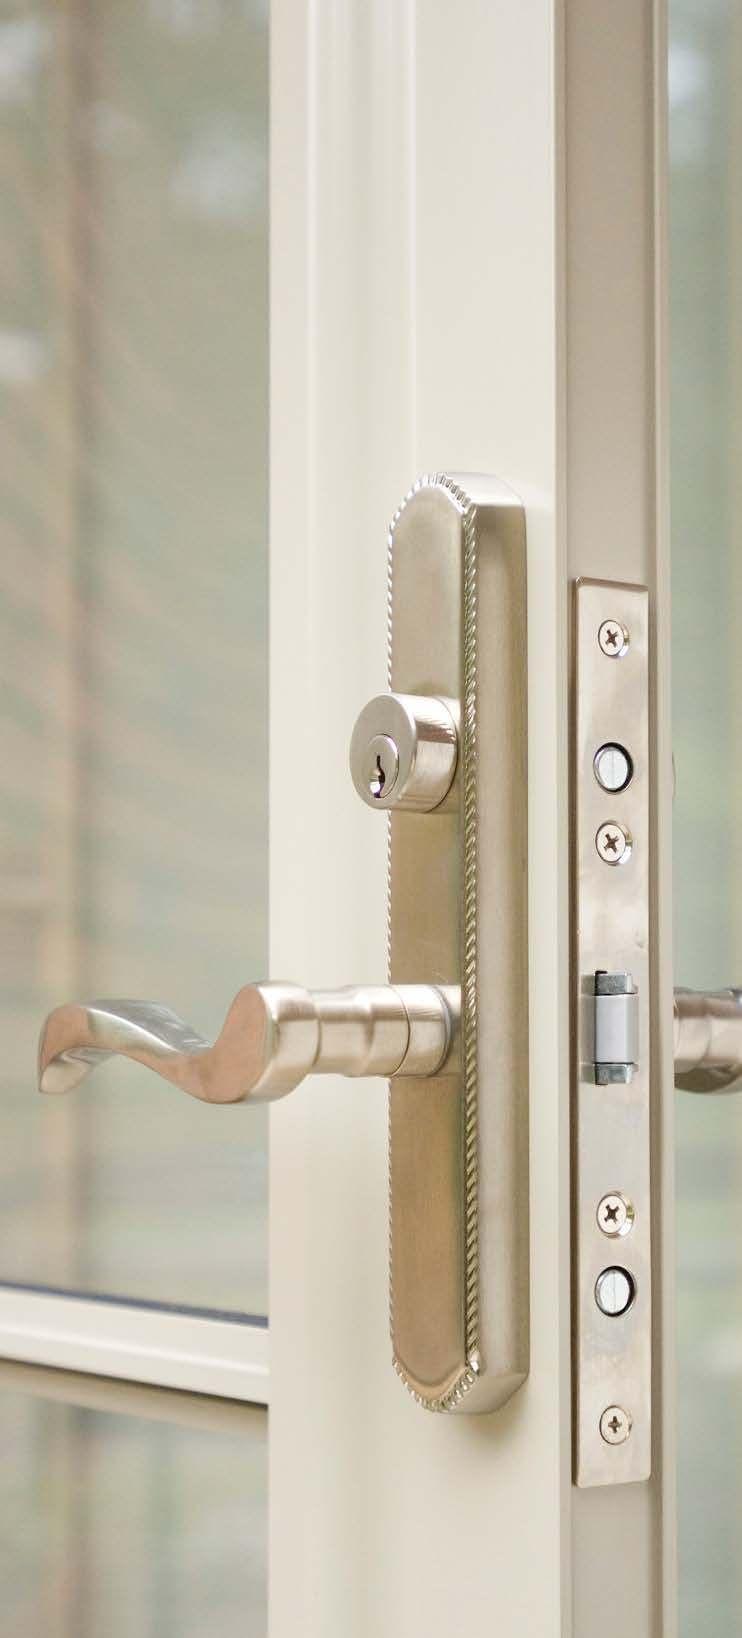 Our Mortise hardware conveniently allows you to use the same key for your storm door and your ProVia